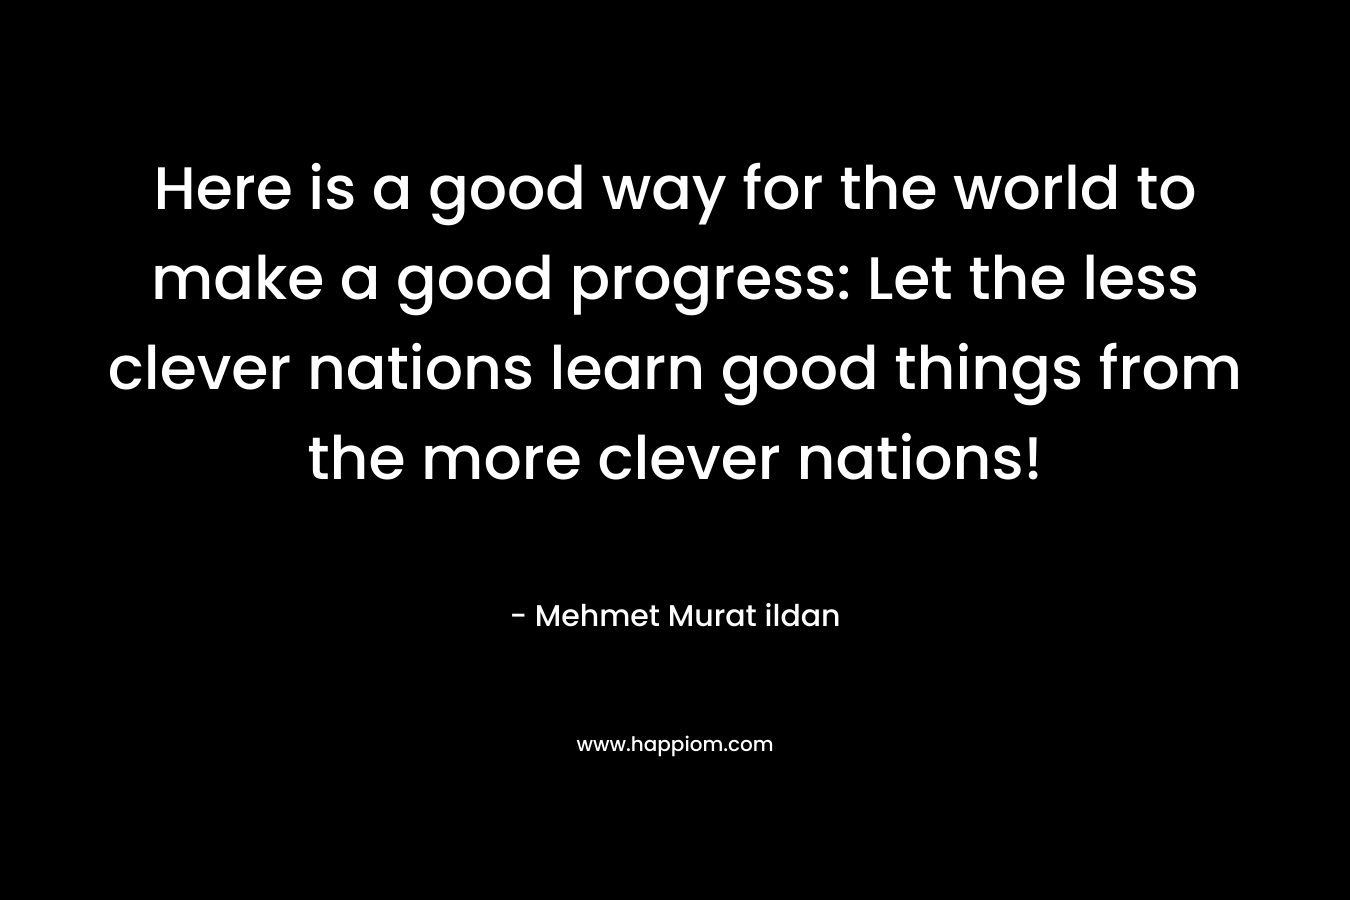 Here is a good way for the world to make a good progress: Let the less clever nations learn good things from the more clever nations! – Mehmet Murat ildan